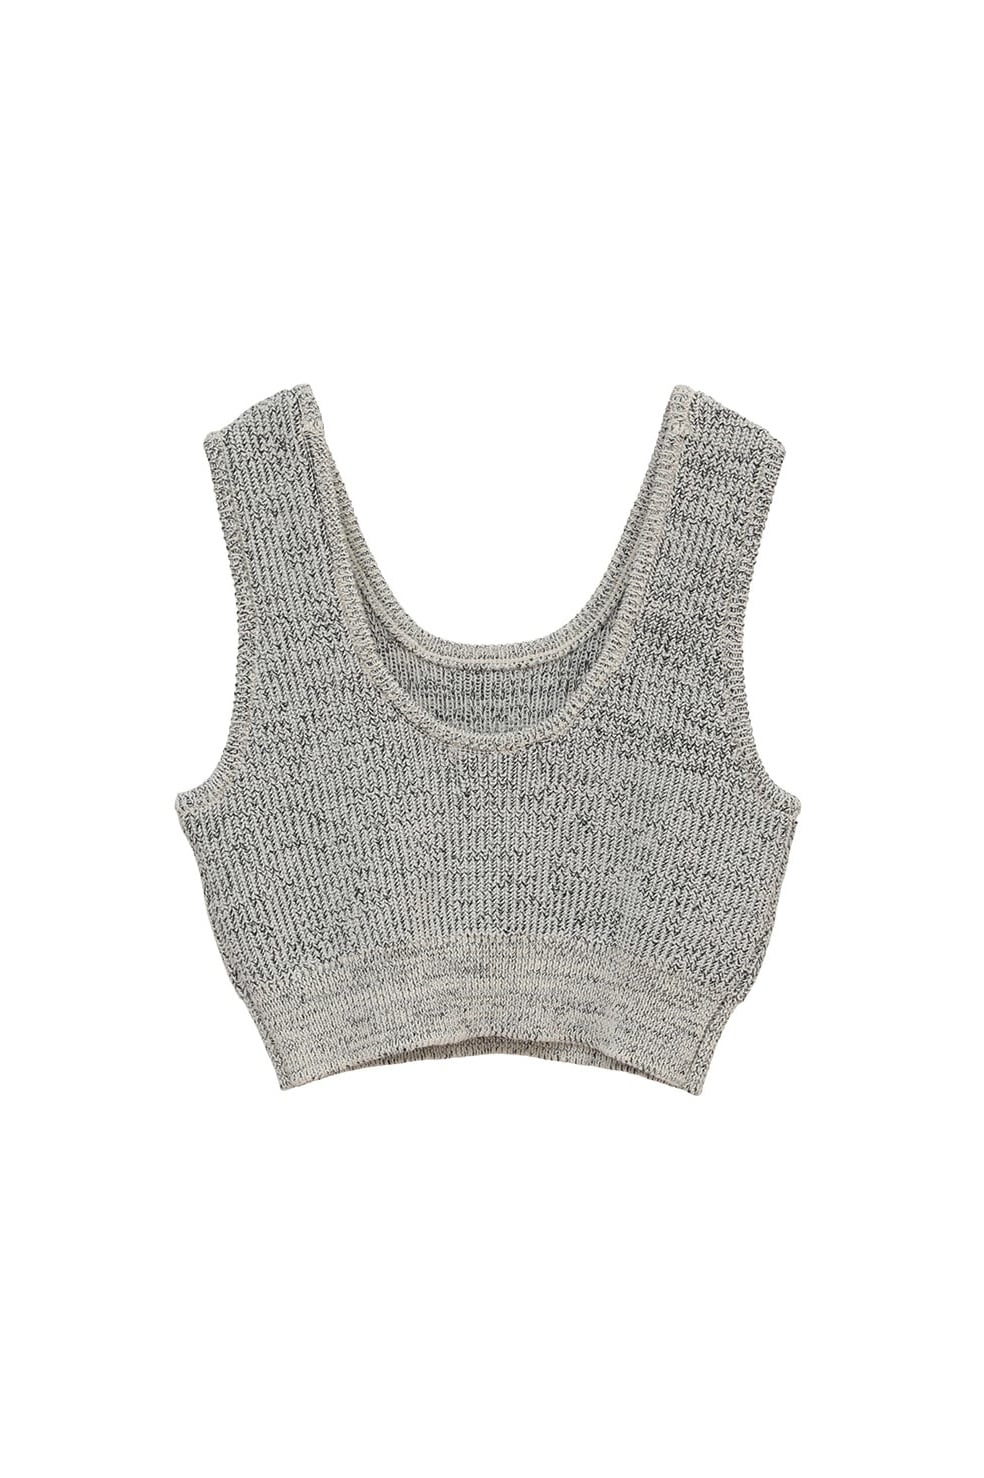 BUSTIER SET KNIT CARDIGAN｜TOPS(トップス)｜CLANE OFFICIAL ONLINE STORE